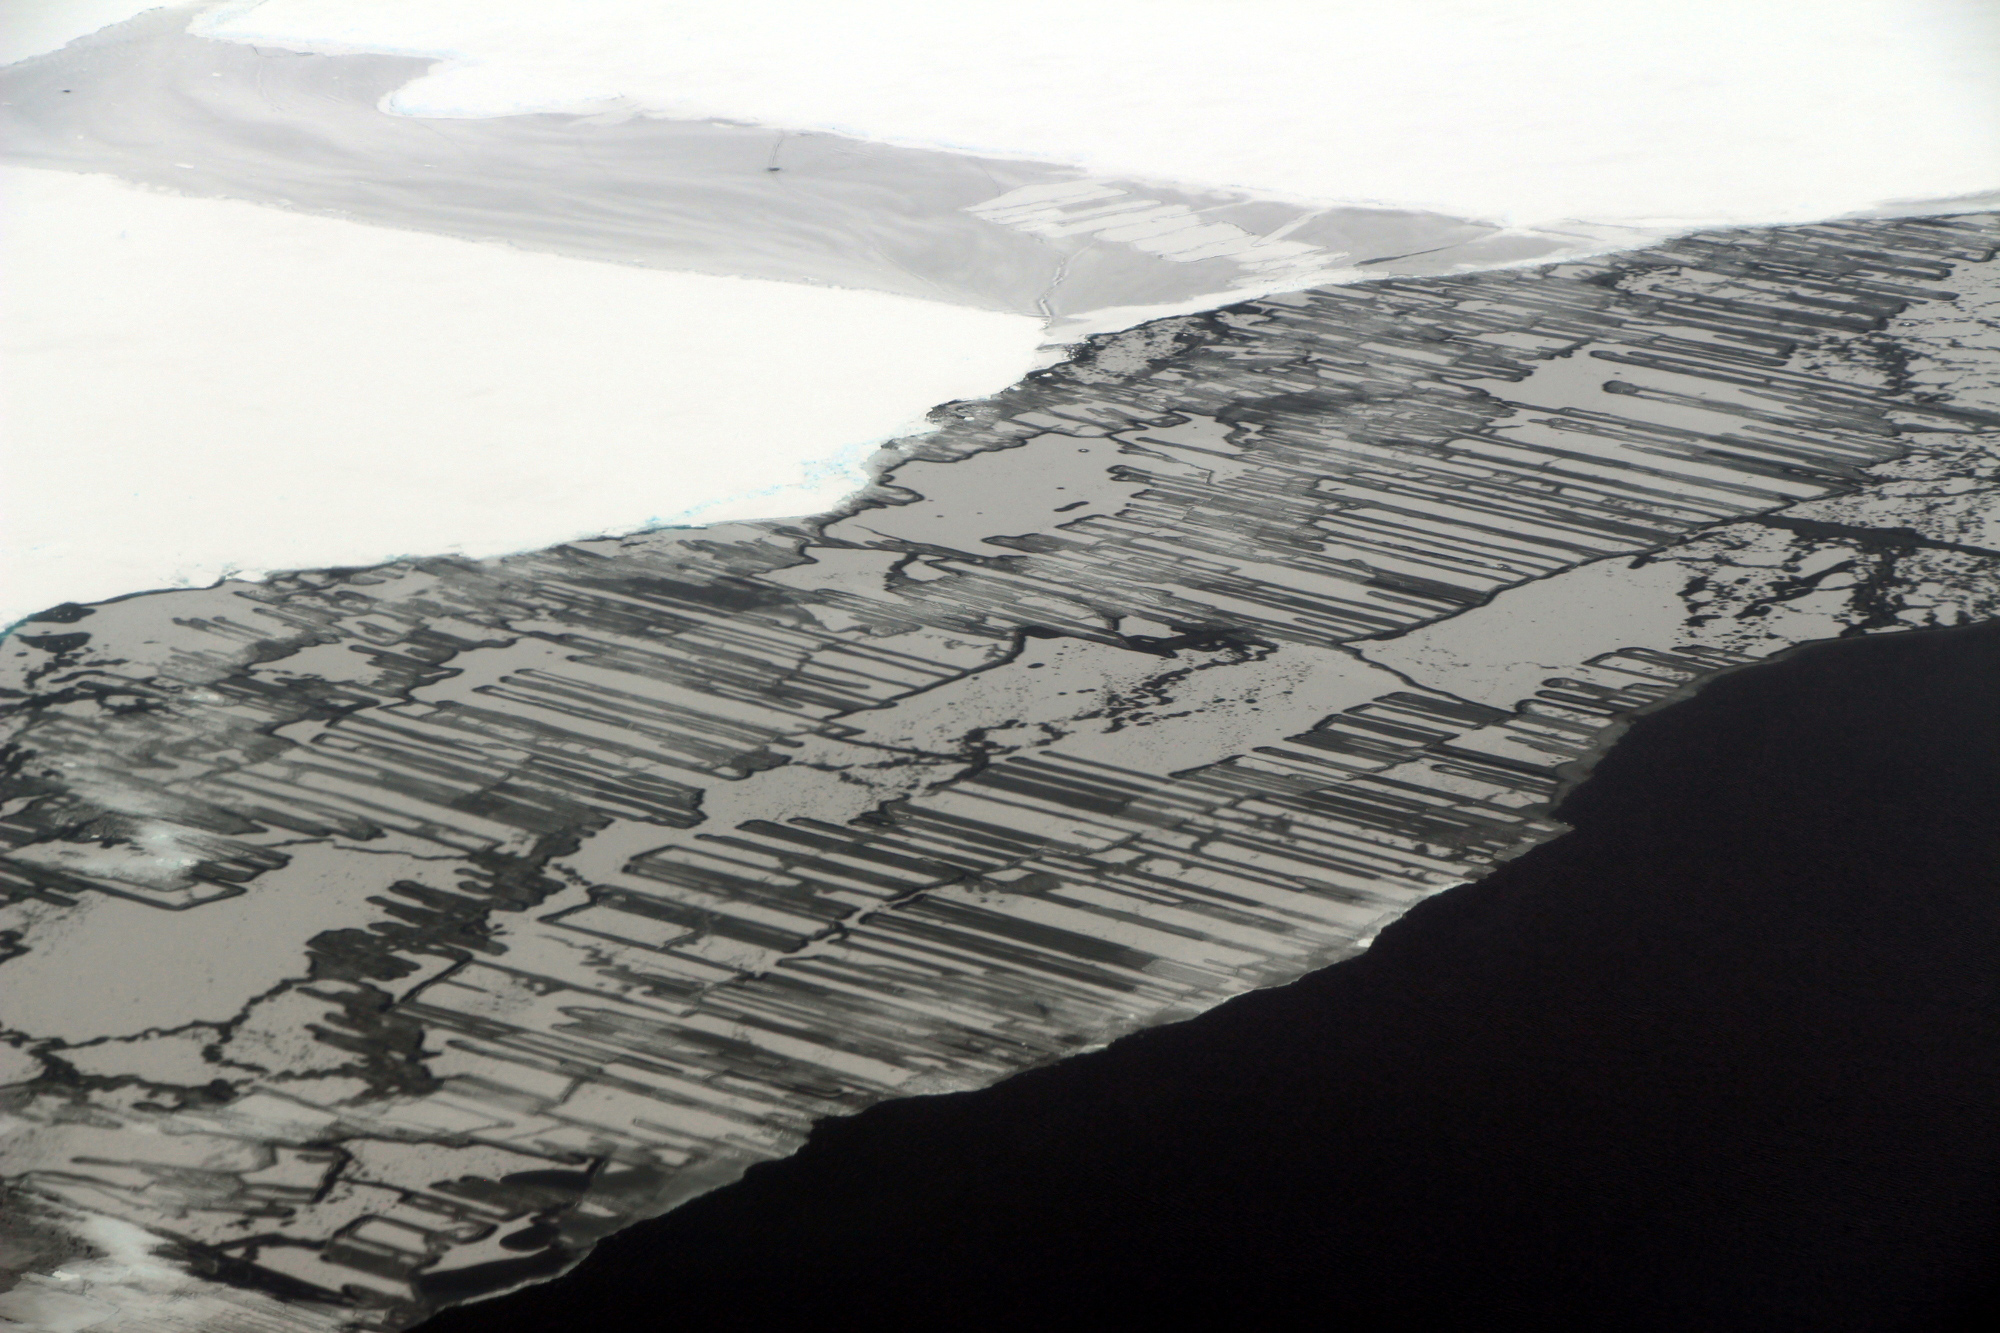 “Finger rafting” produced by colliding ice floes in the Weddell Sea, off the Antarctic Peninsula.